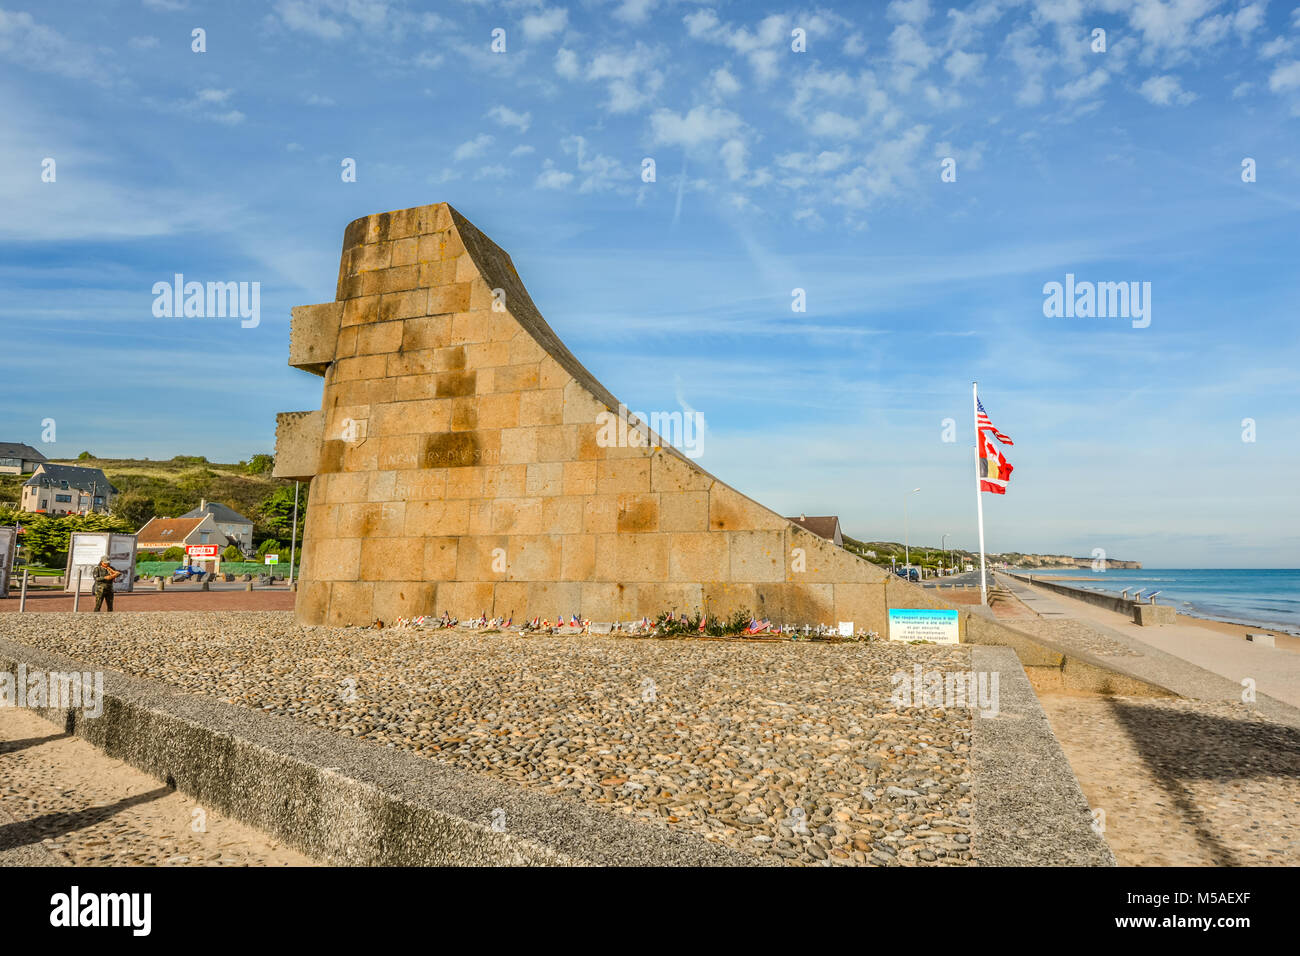 The Omaha Beach memorial at Saint-Laurent-sur-Mer, site of the D Day invasion of World War 2 on the Normandy coast of France Stock Photo